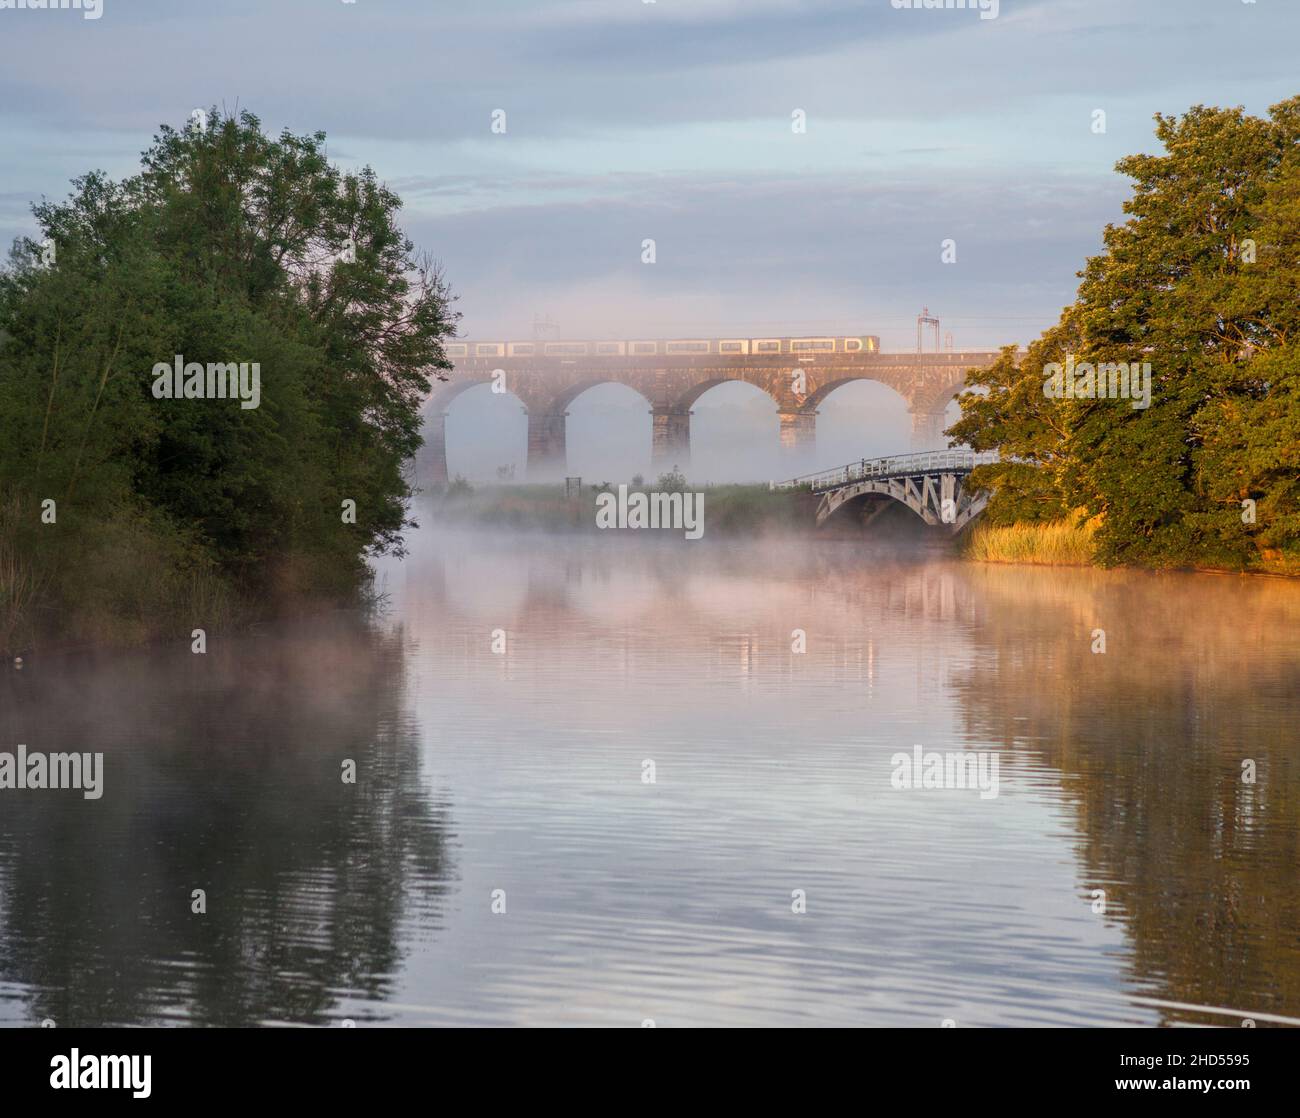 London North western railway class 350 electric train crossing Dutton viaduct  over the Weaver navigation, Cheshire on a misty morning Stock Photo